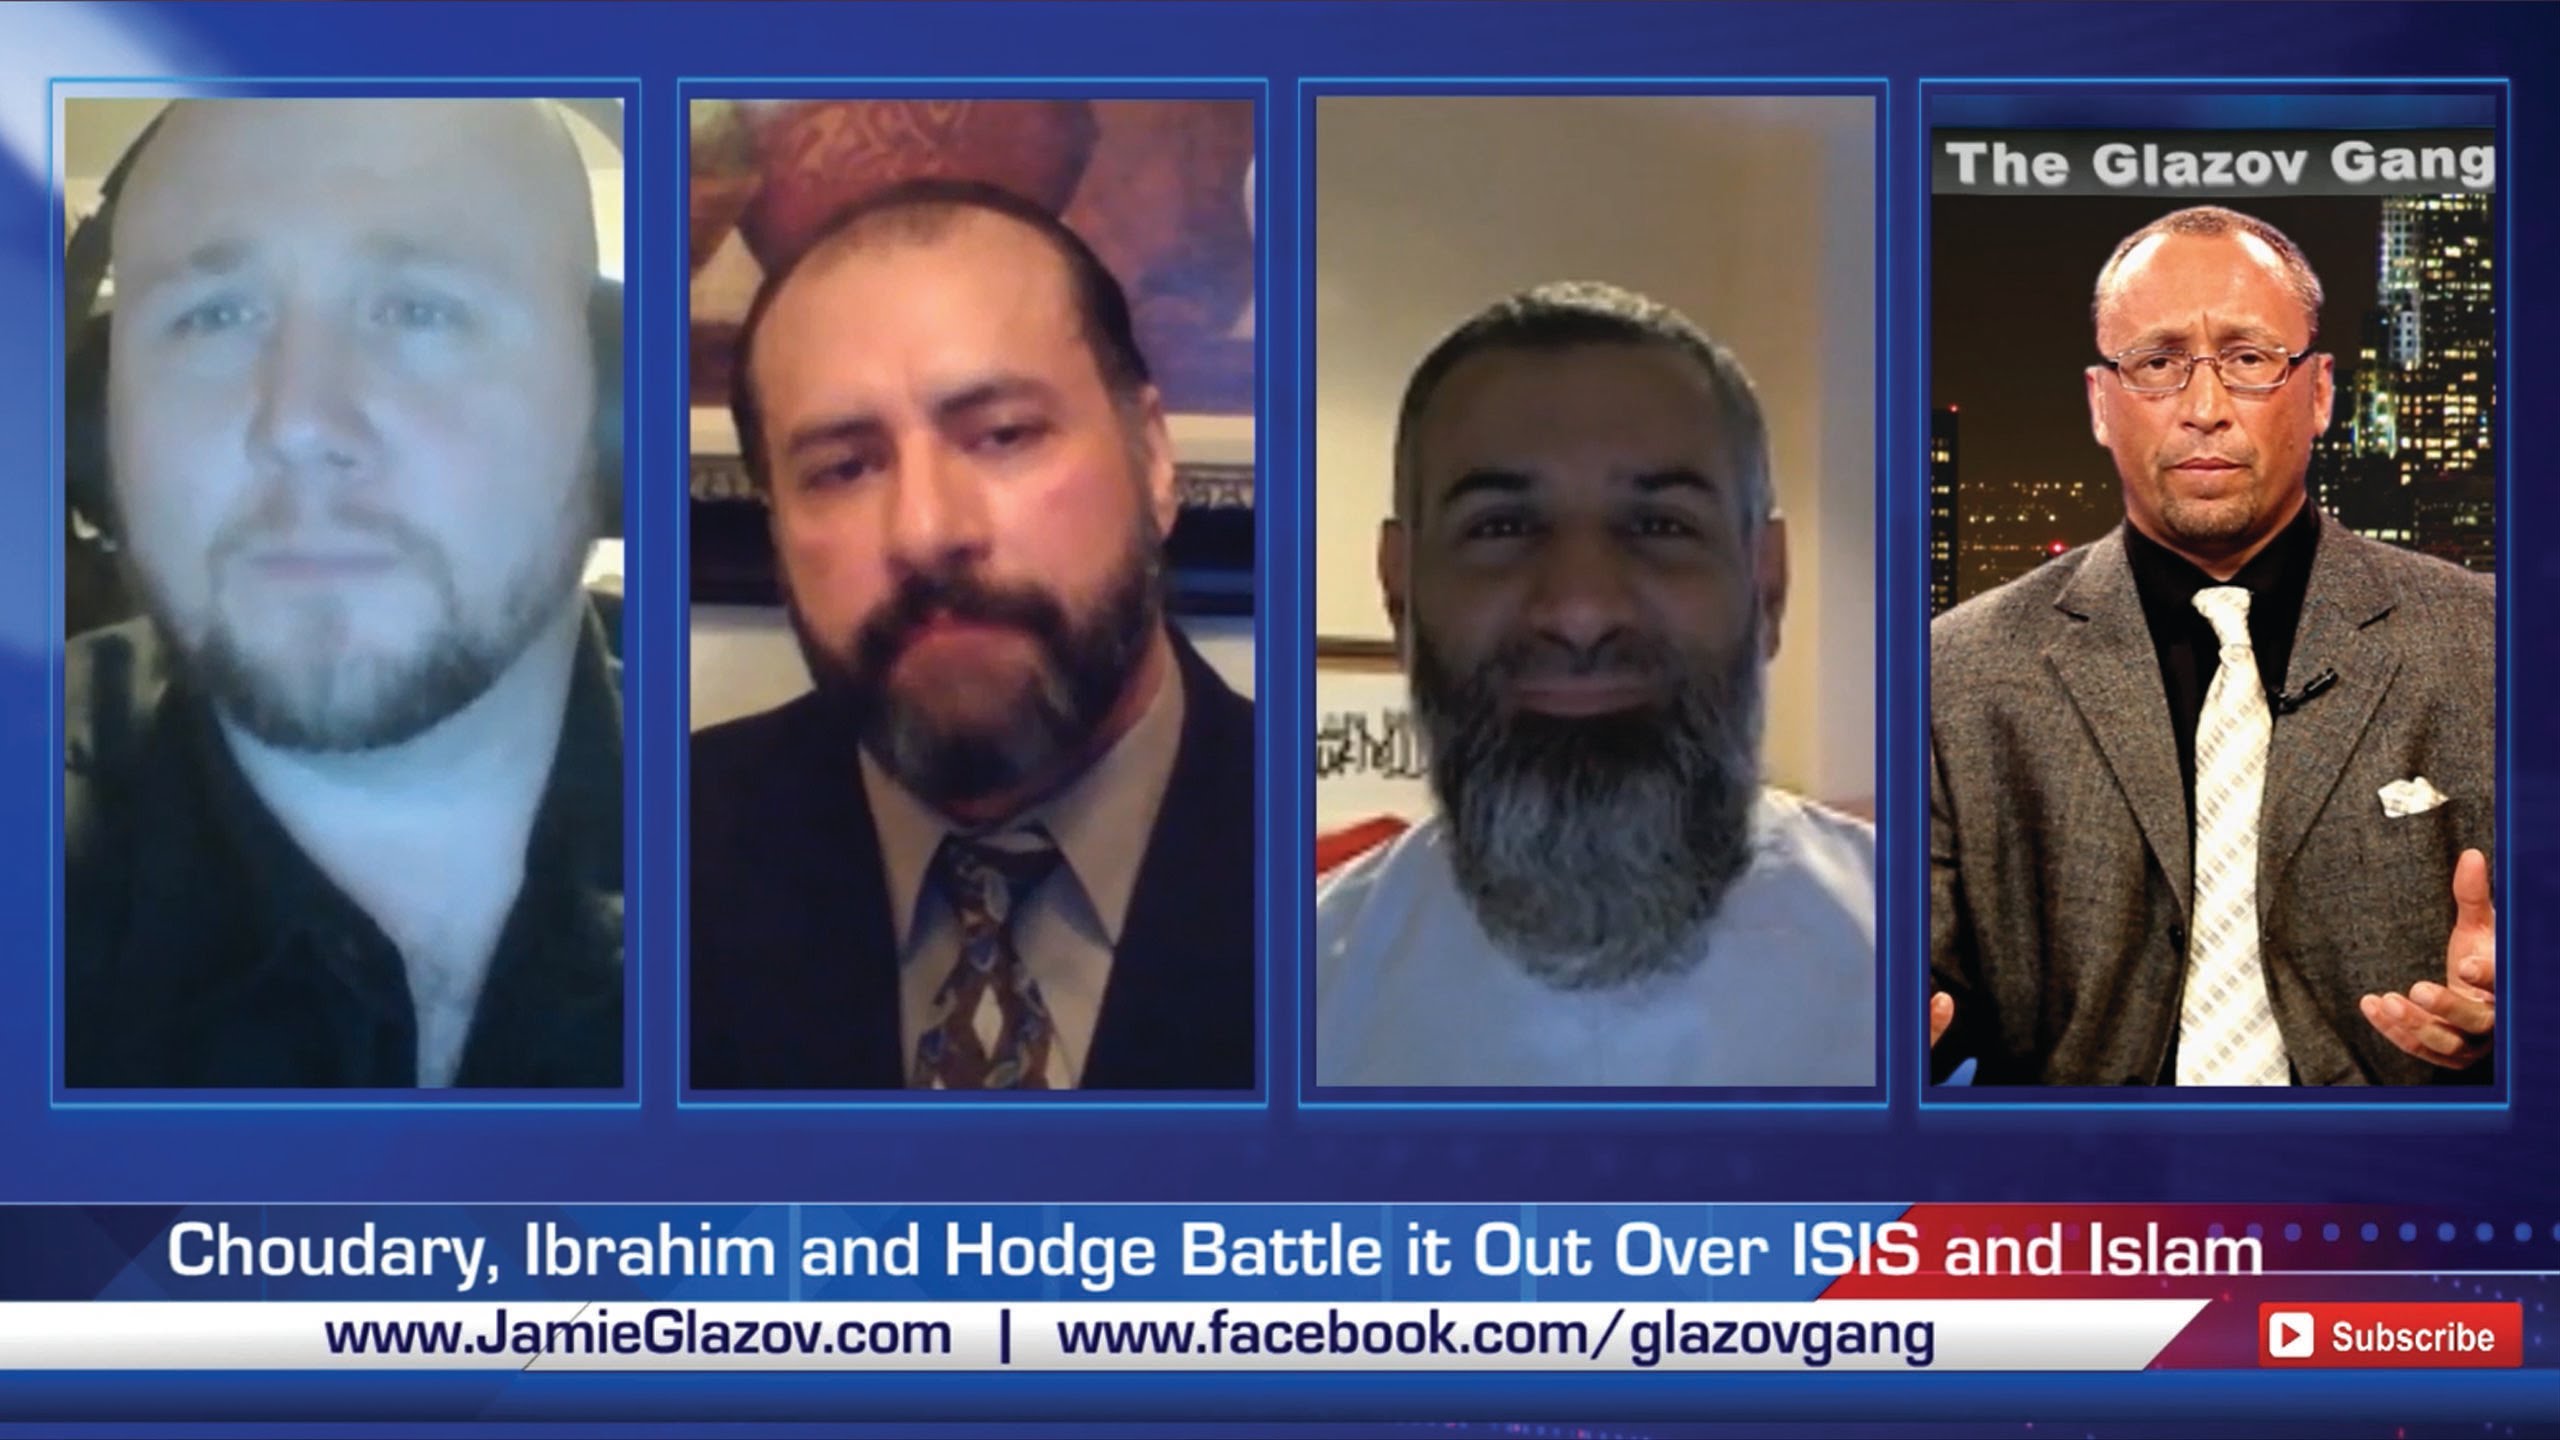 Choudary, Ibrahim and Hodge Battle it Out Over ISIS and Islam